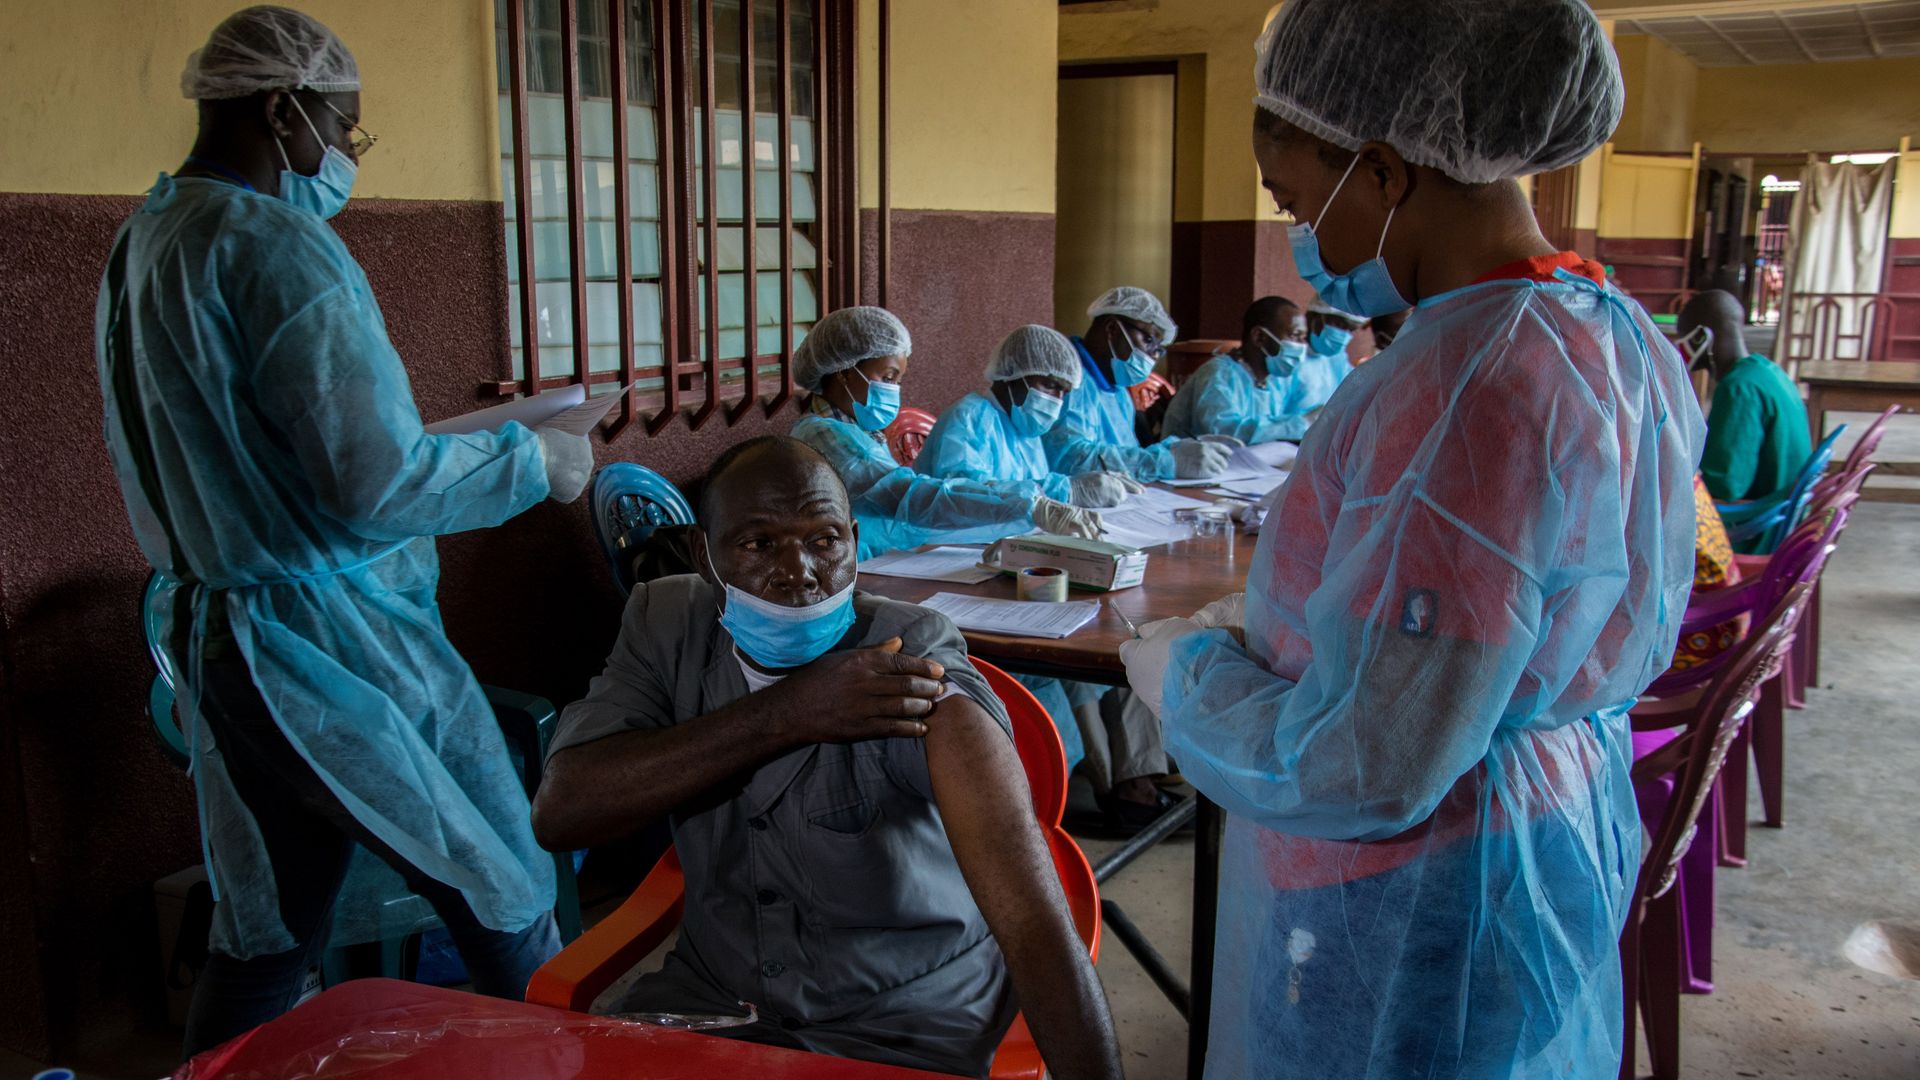 A health worker administering an anti-Ebola vaccination in N'zerekore, Guinea, on Feb. 24.